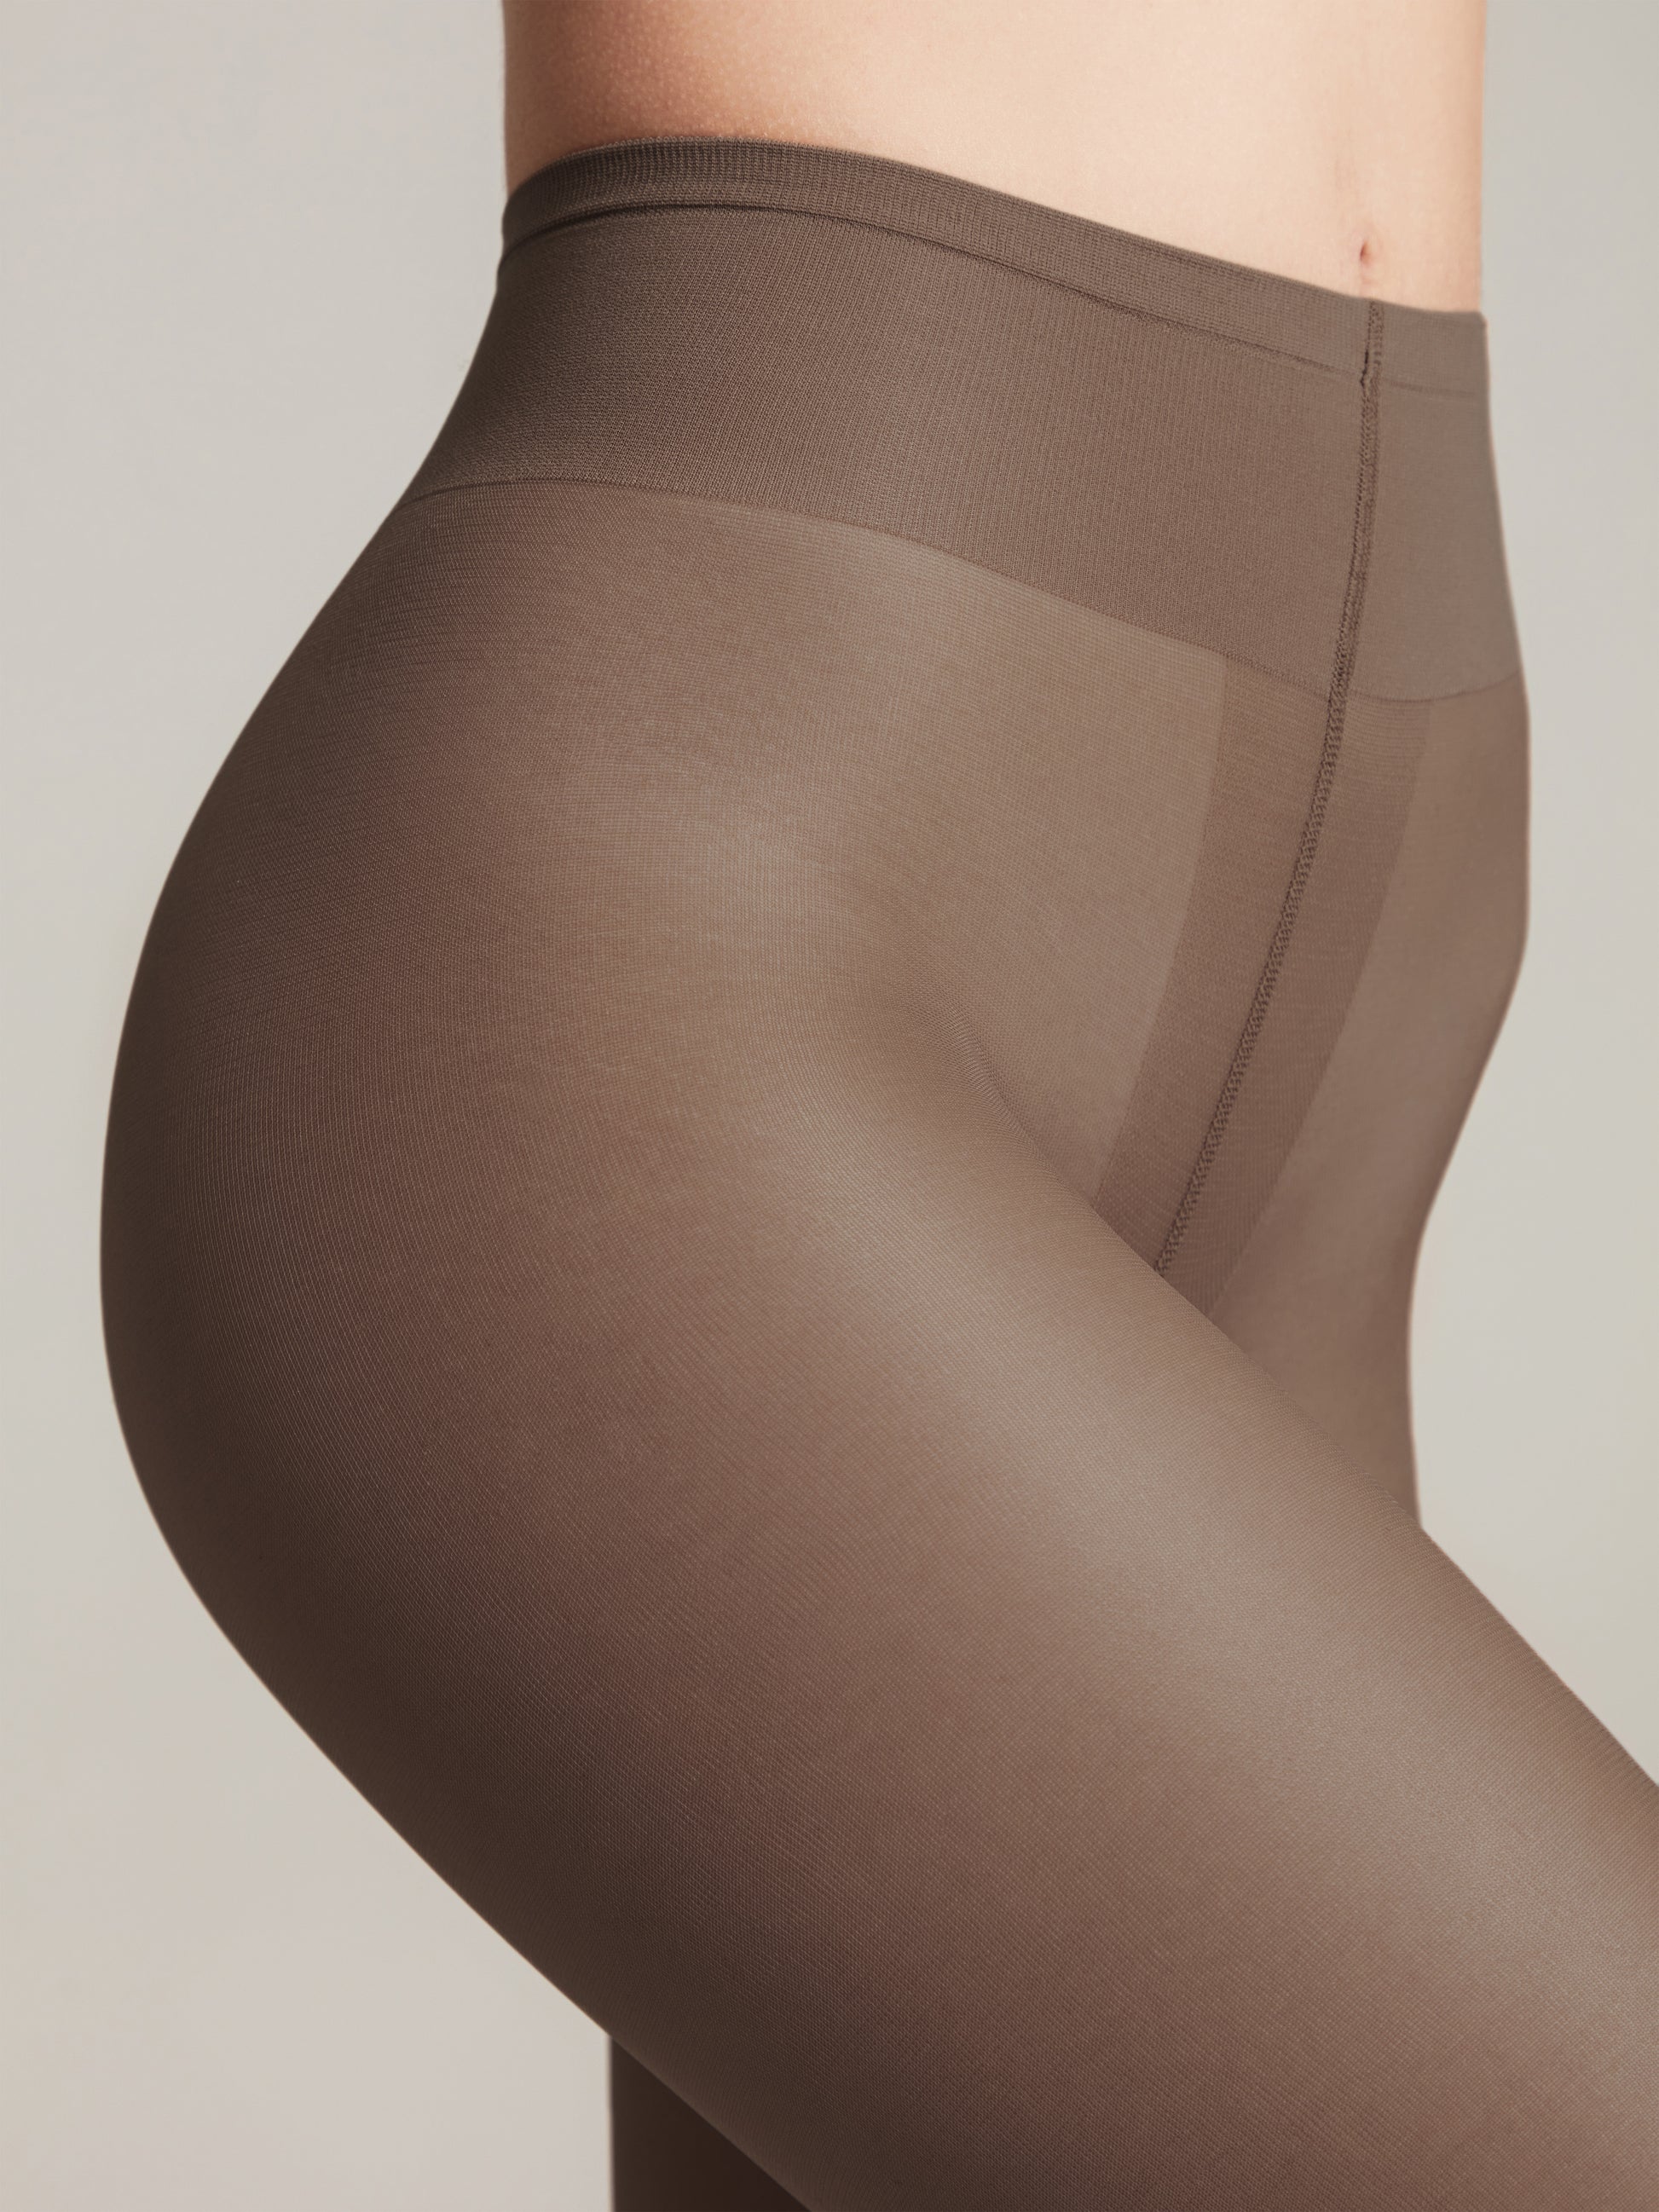 New Wolford Satin Touch Tights 20, Mocca Brown, S -  Canada